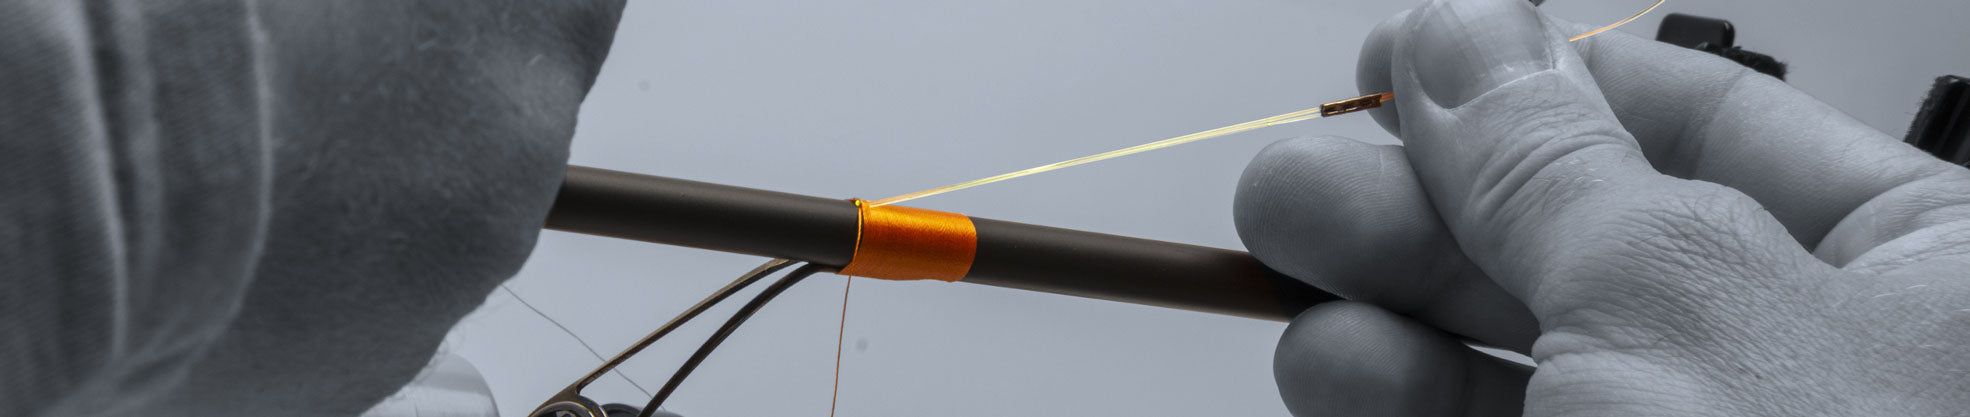 Thread Accessories for Rod Building - Free Shipping